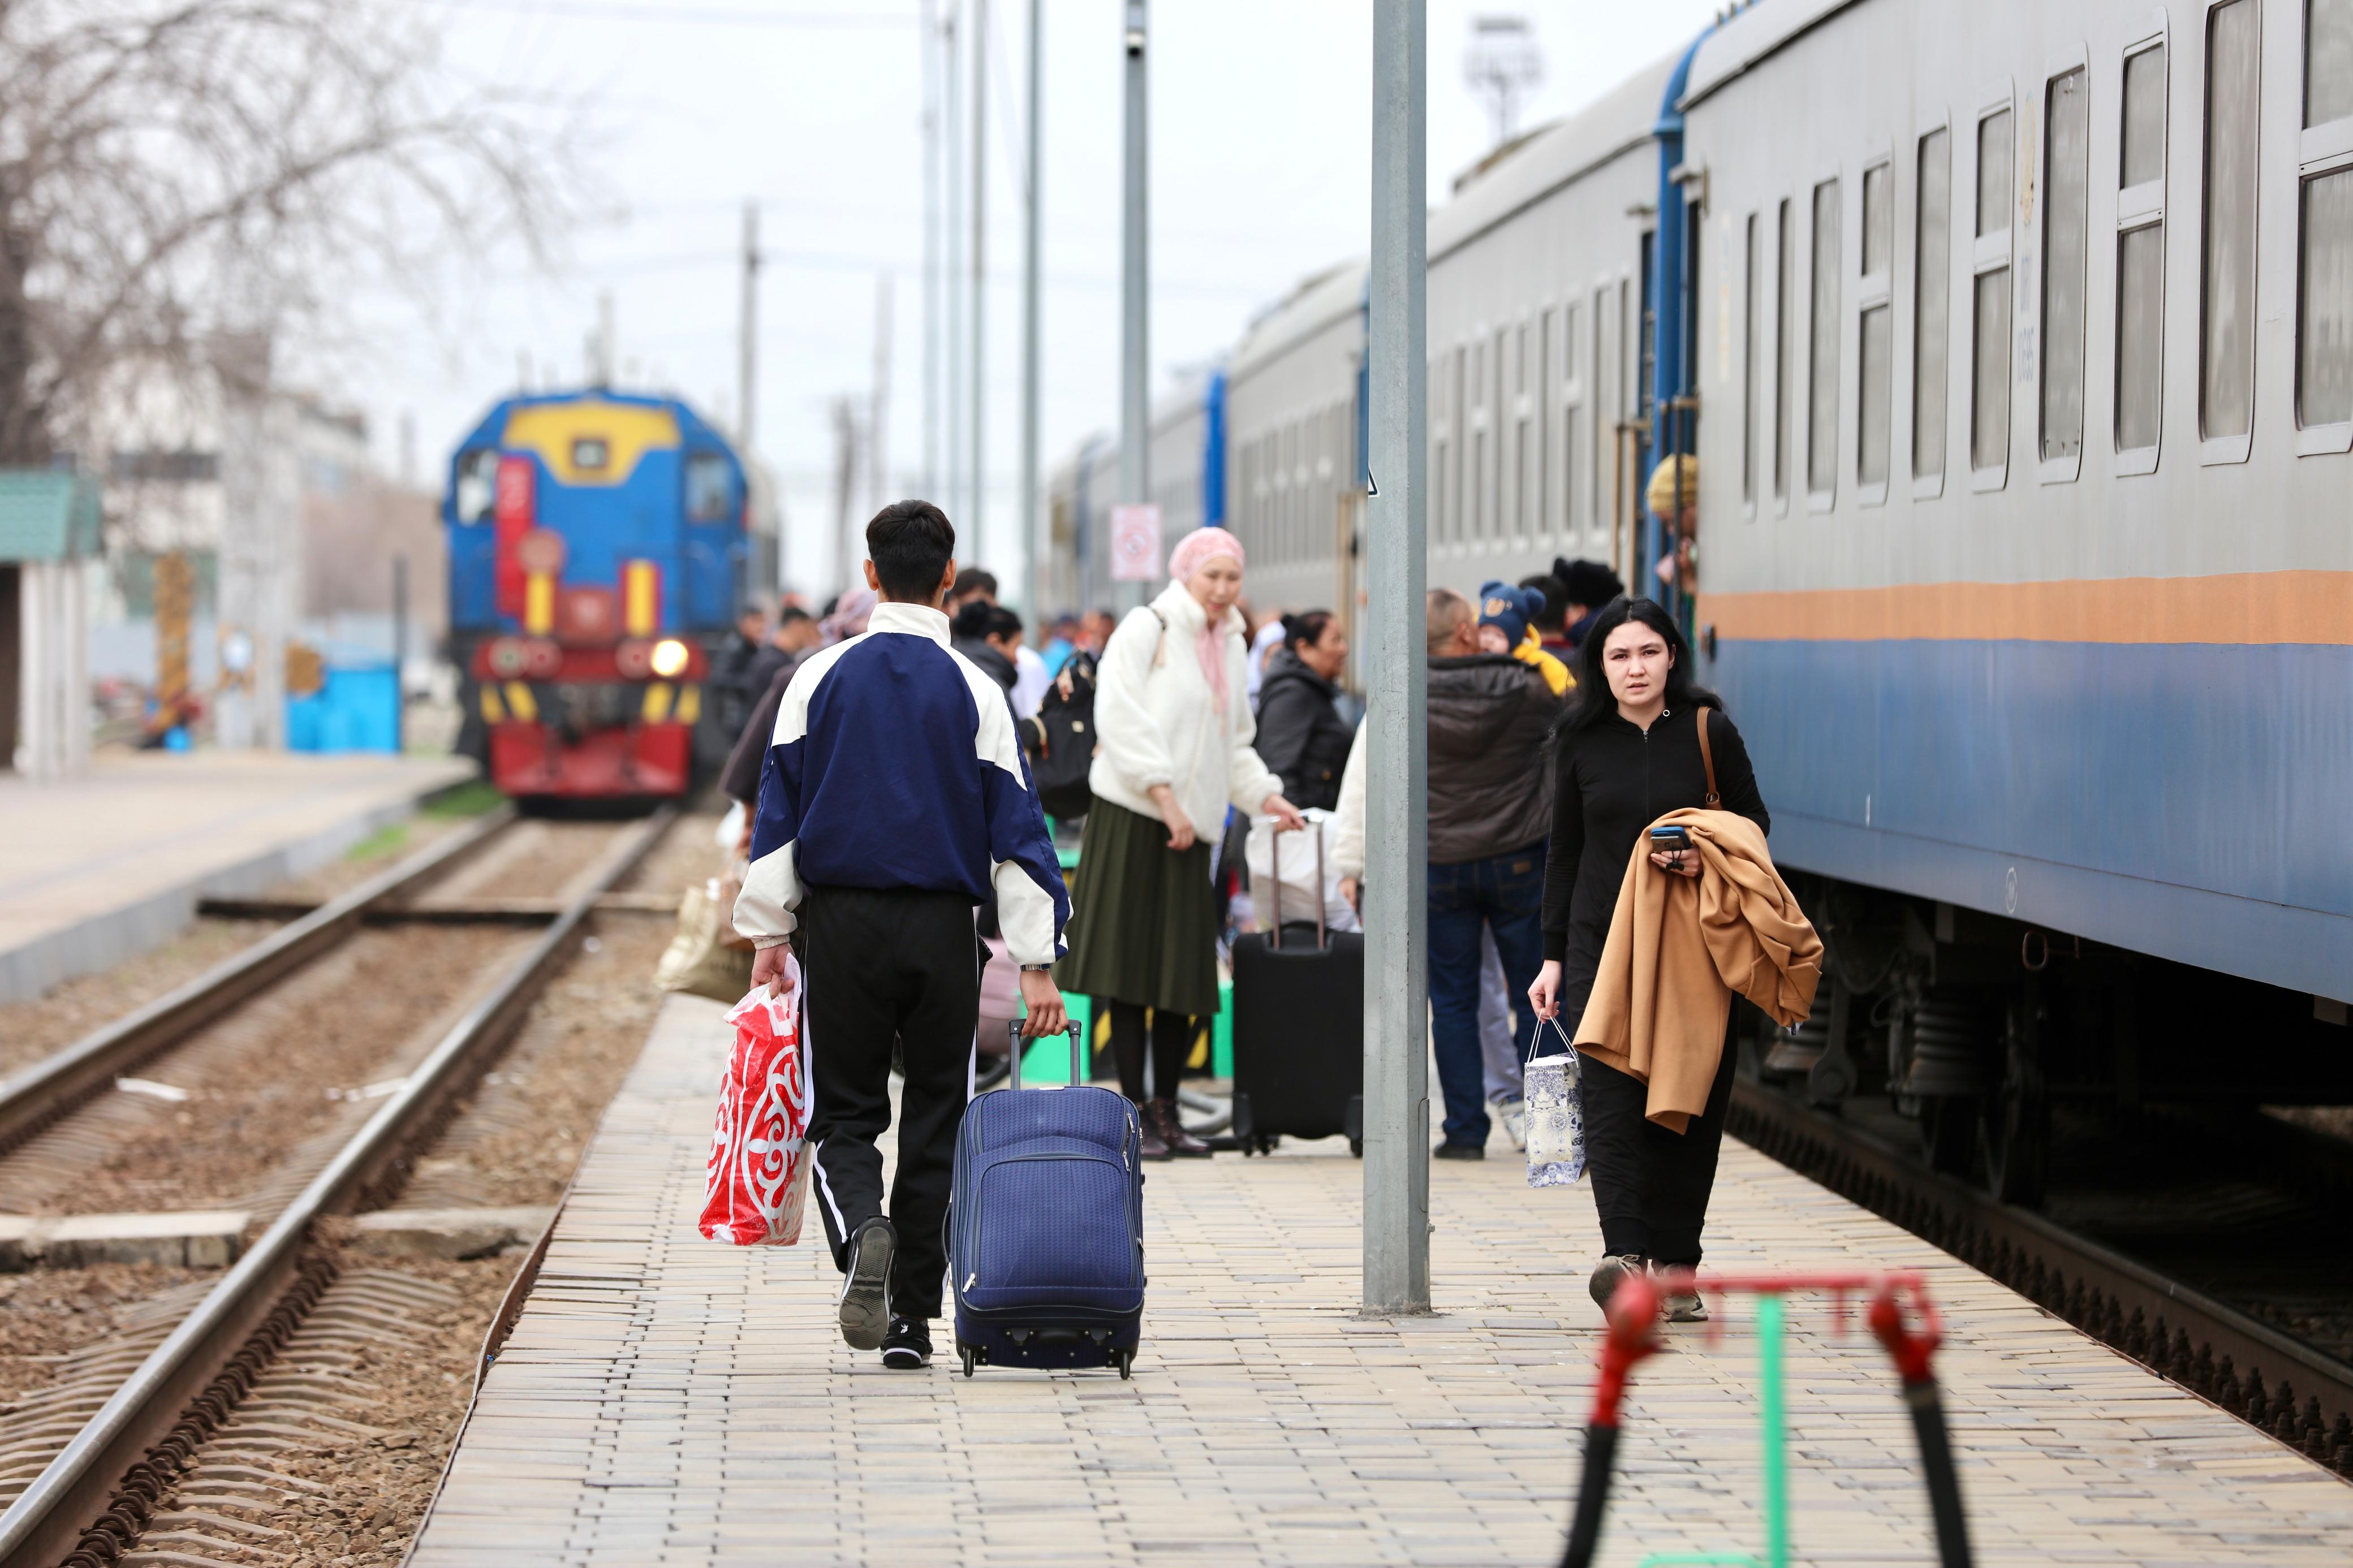 KTZ transported by train more than 317 thousand passengers during the May holidays